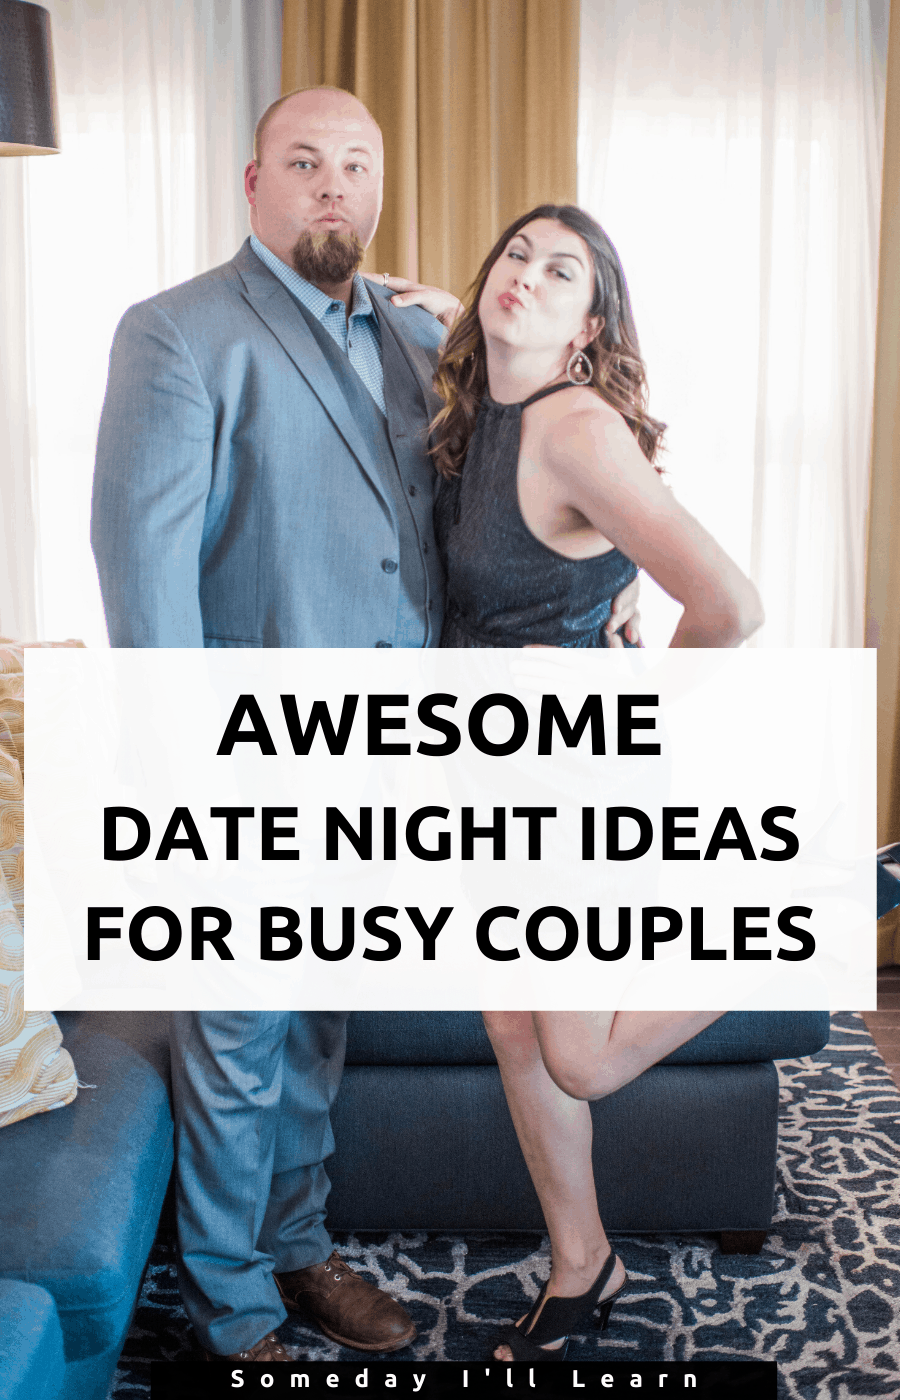 Awesome date night ideas for busy couples